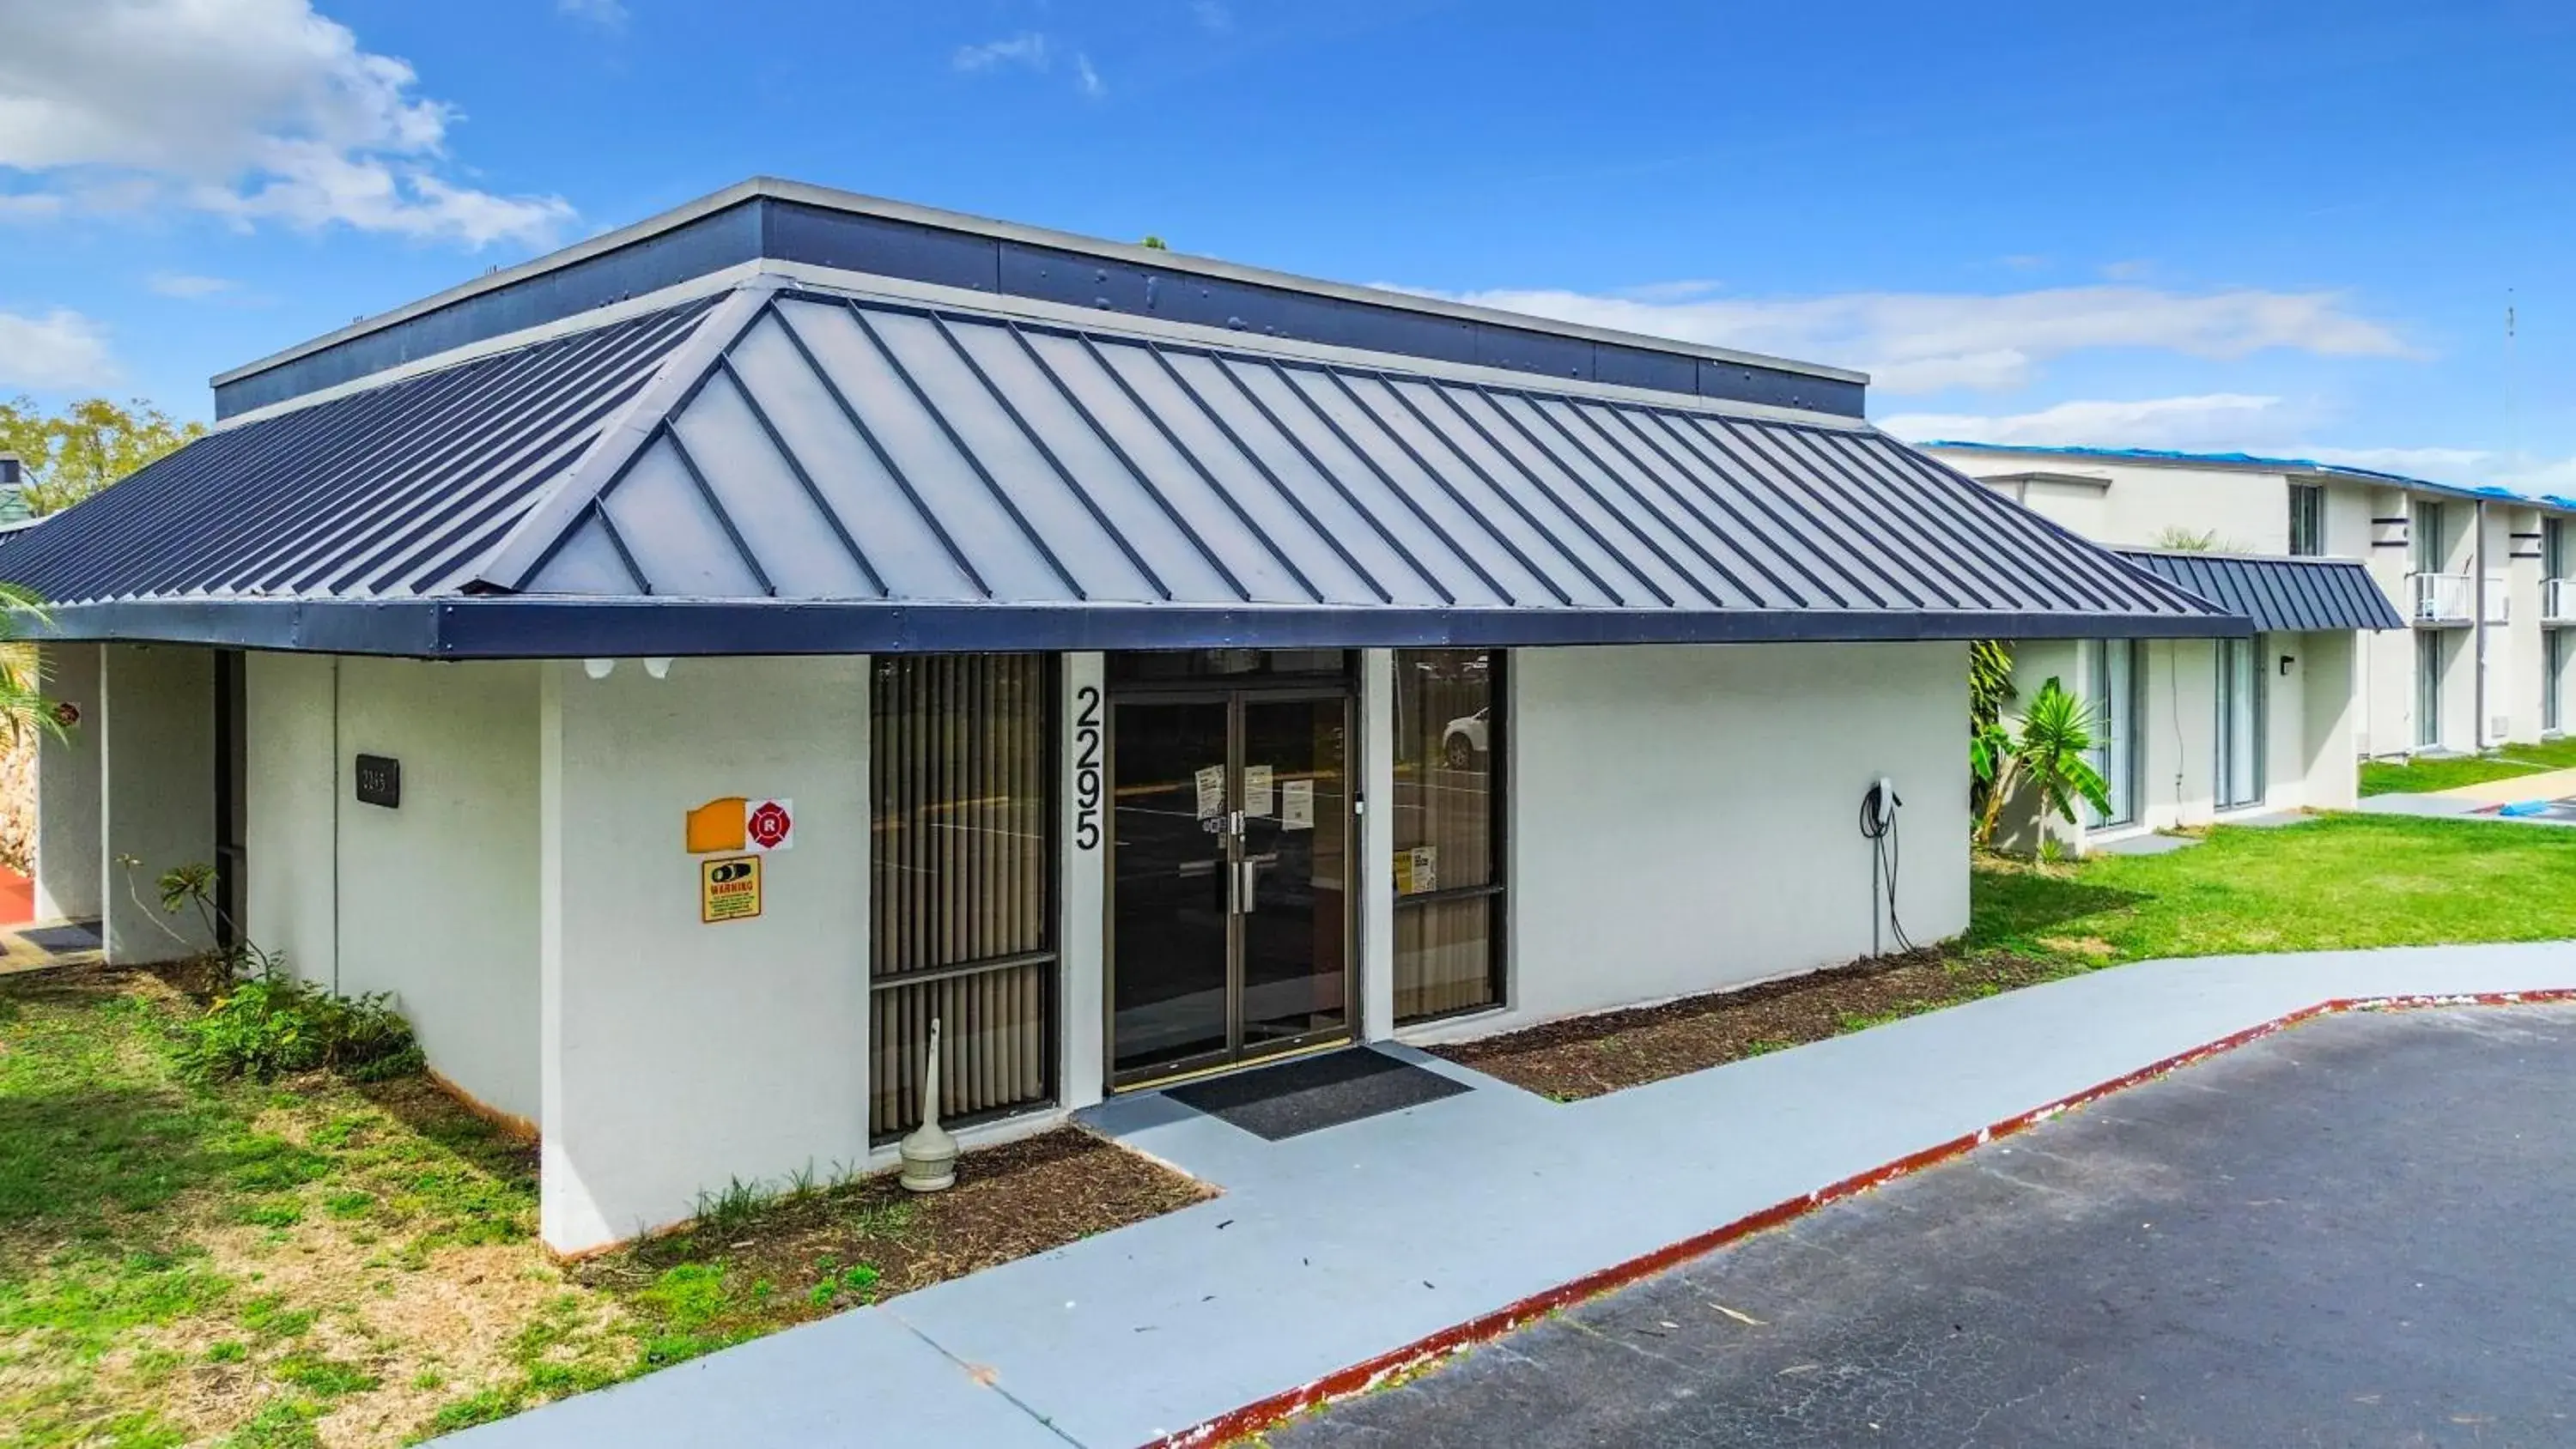 Property Building in Stayable Suites Lakeland